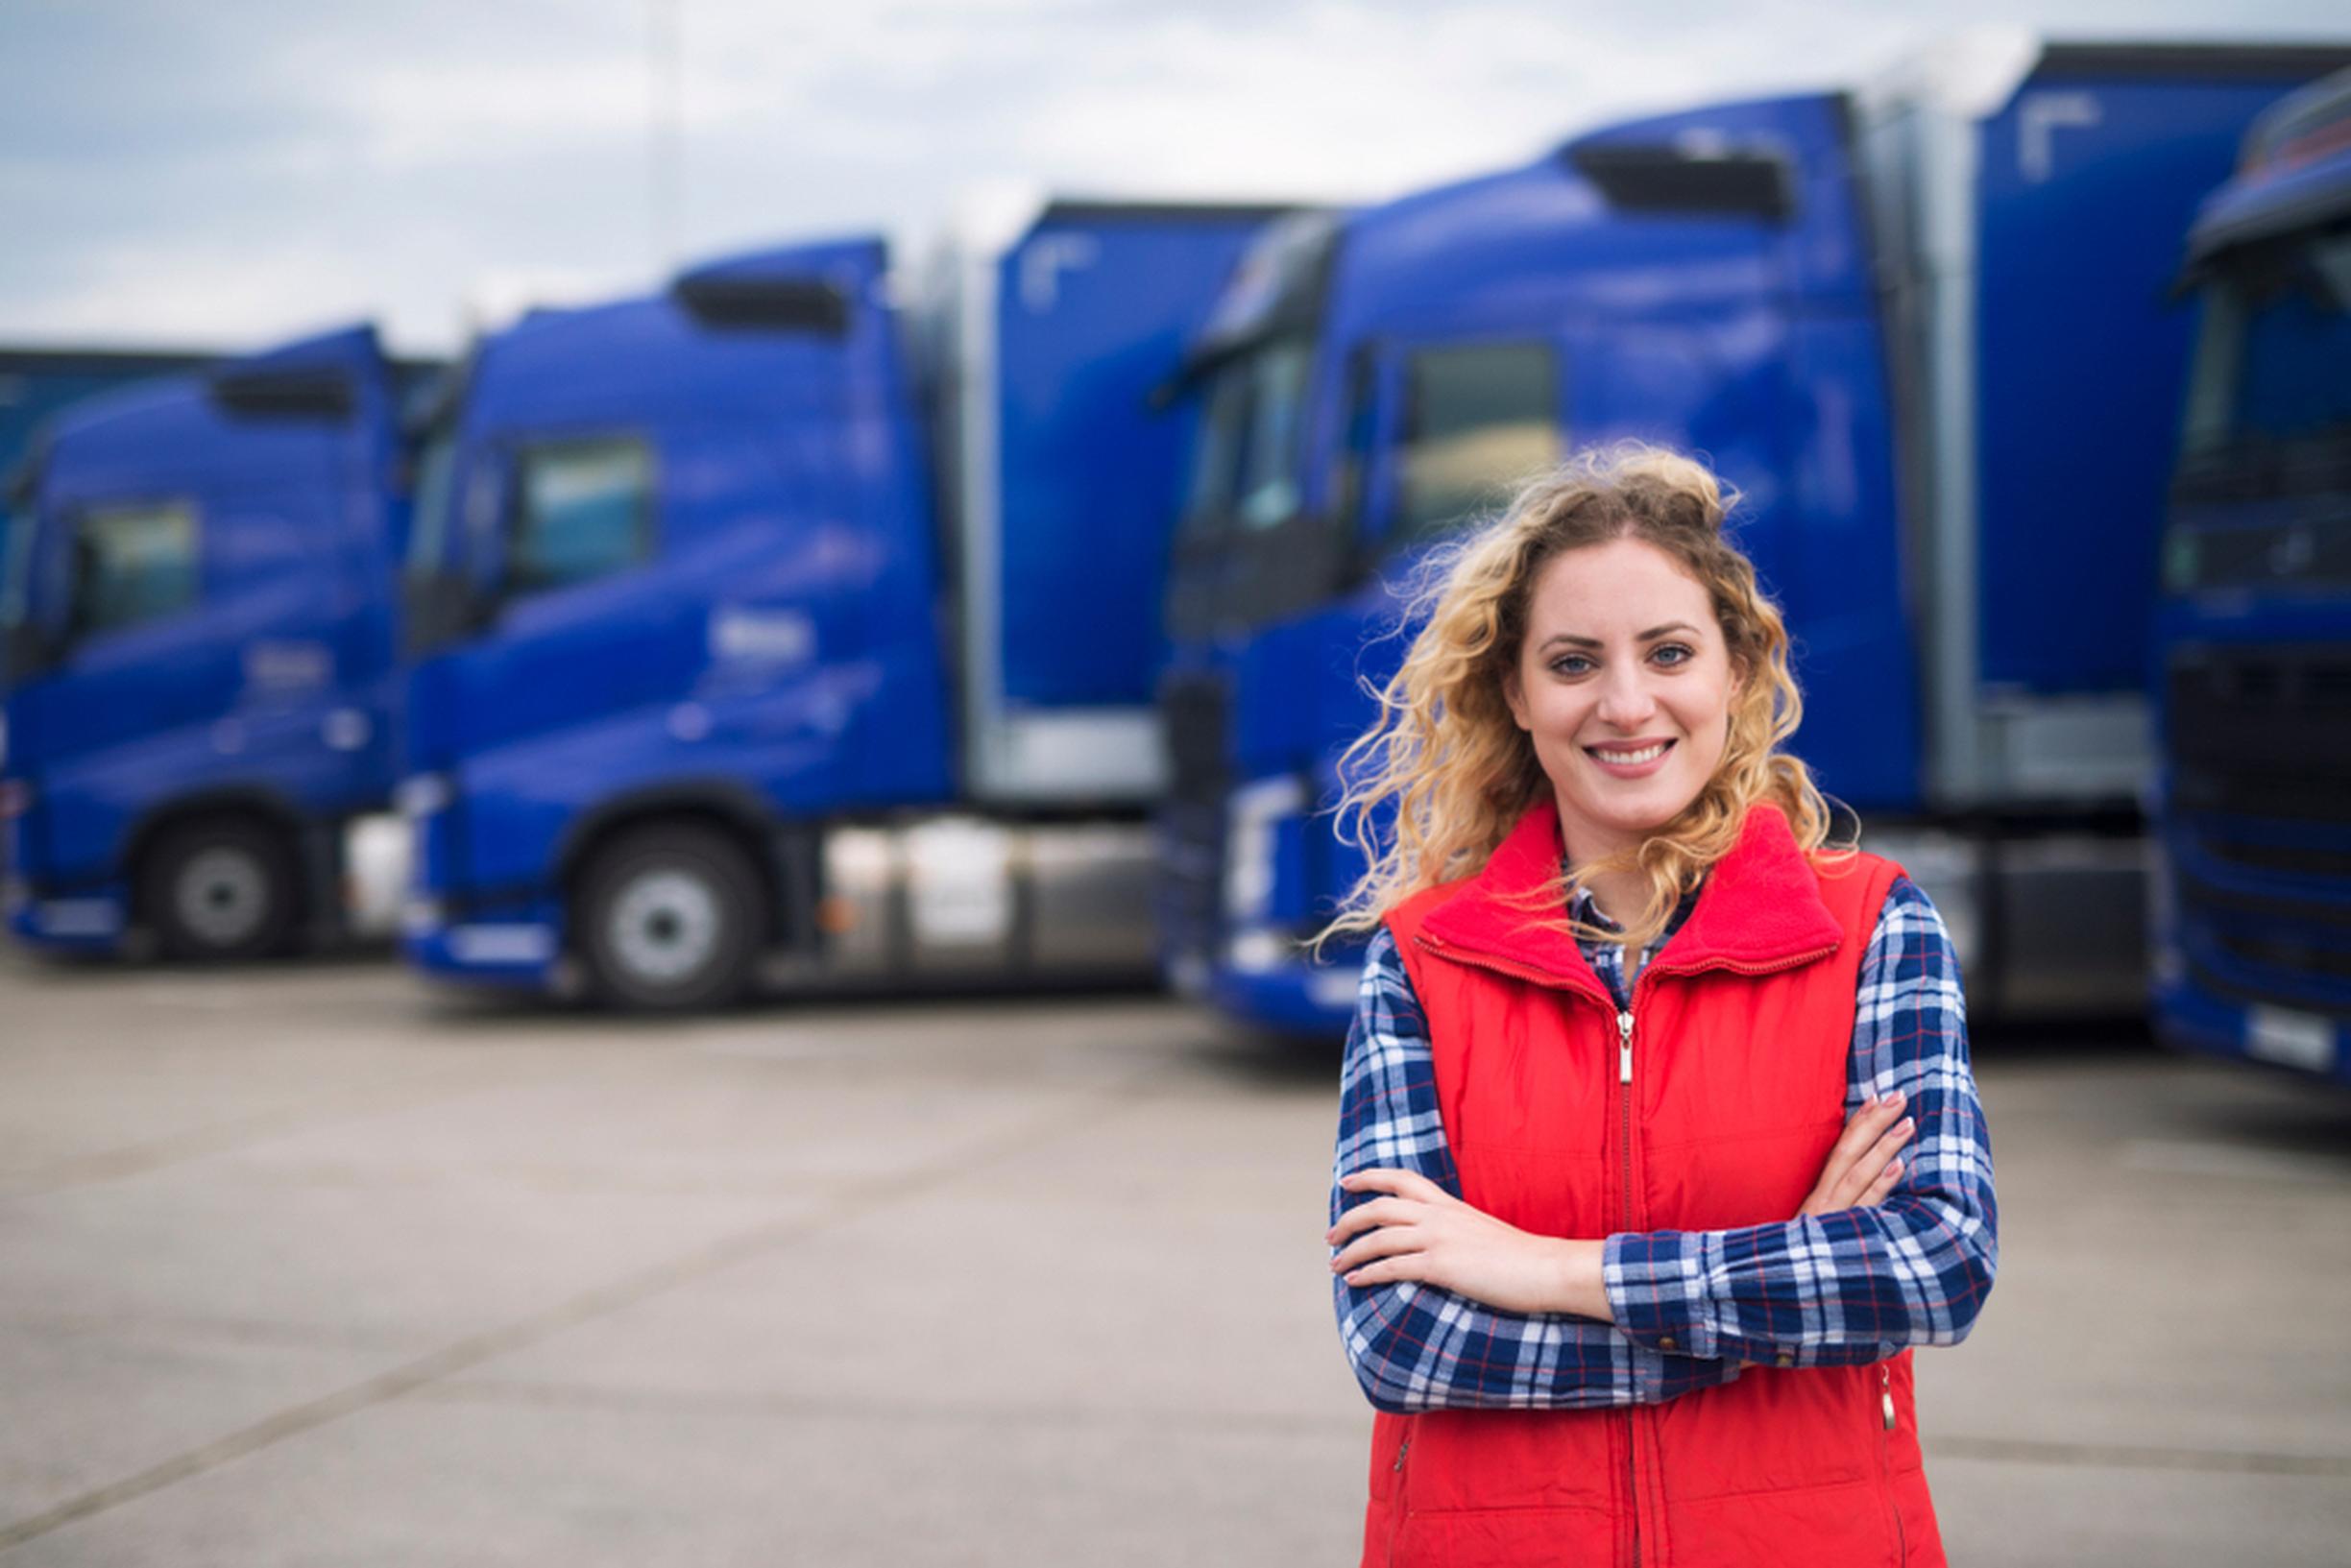 More needs to be done to encourage women to pursue a career in transport and logistics, says Returnloads